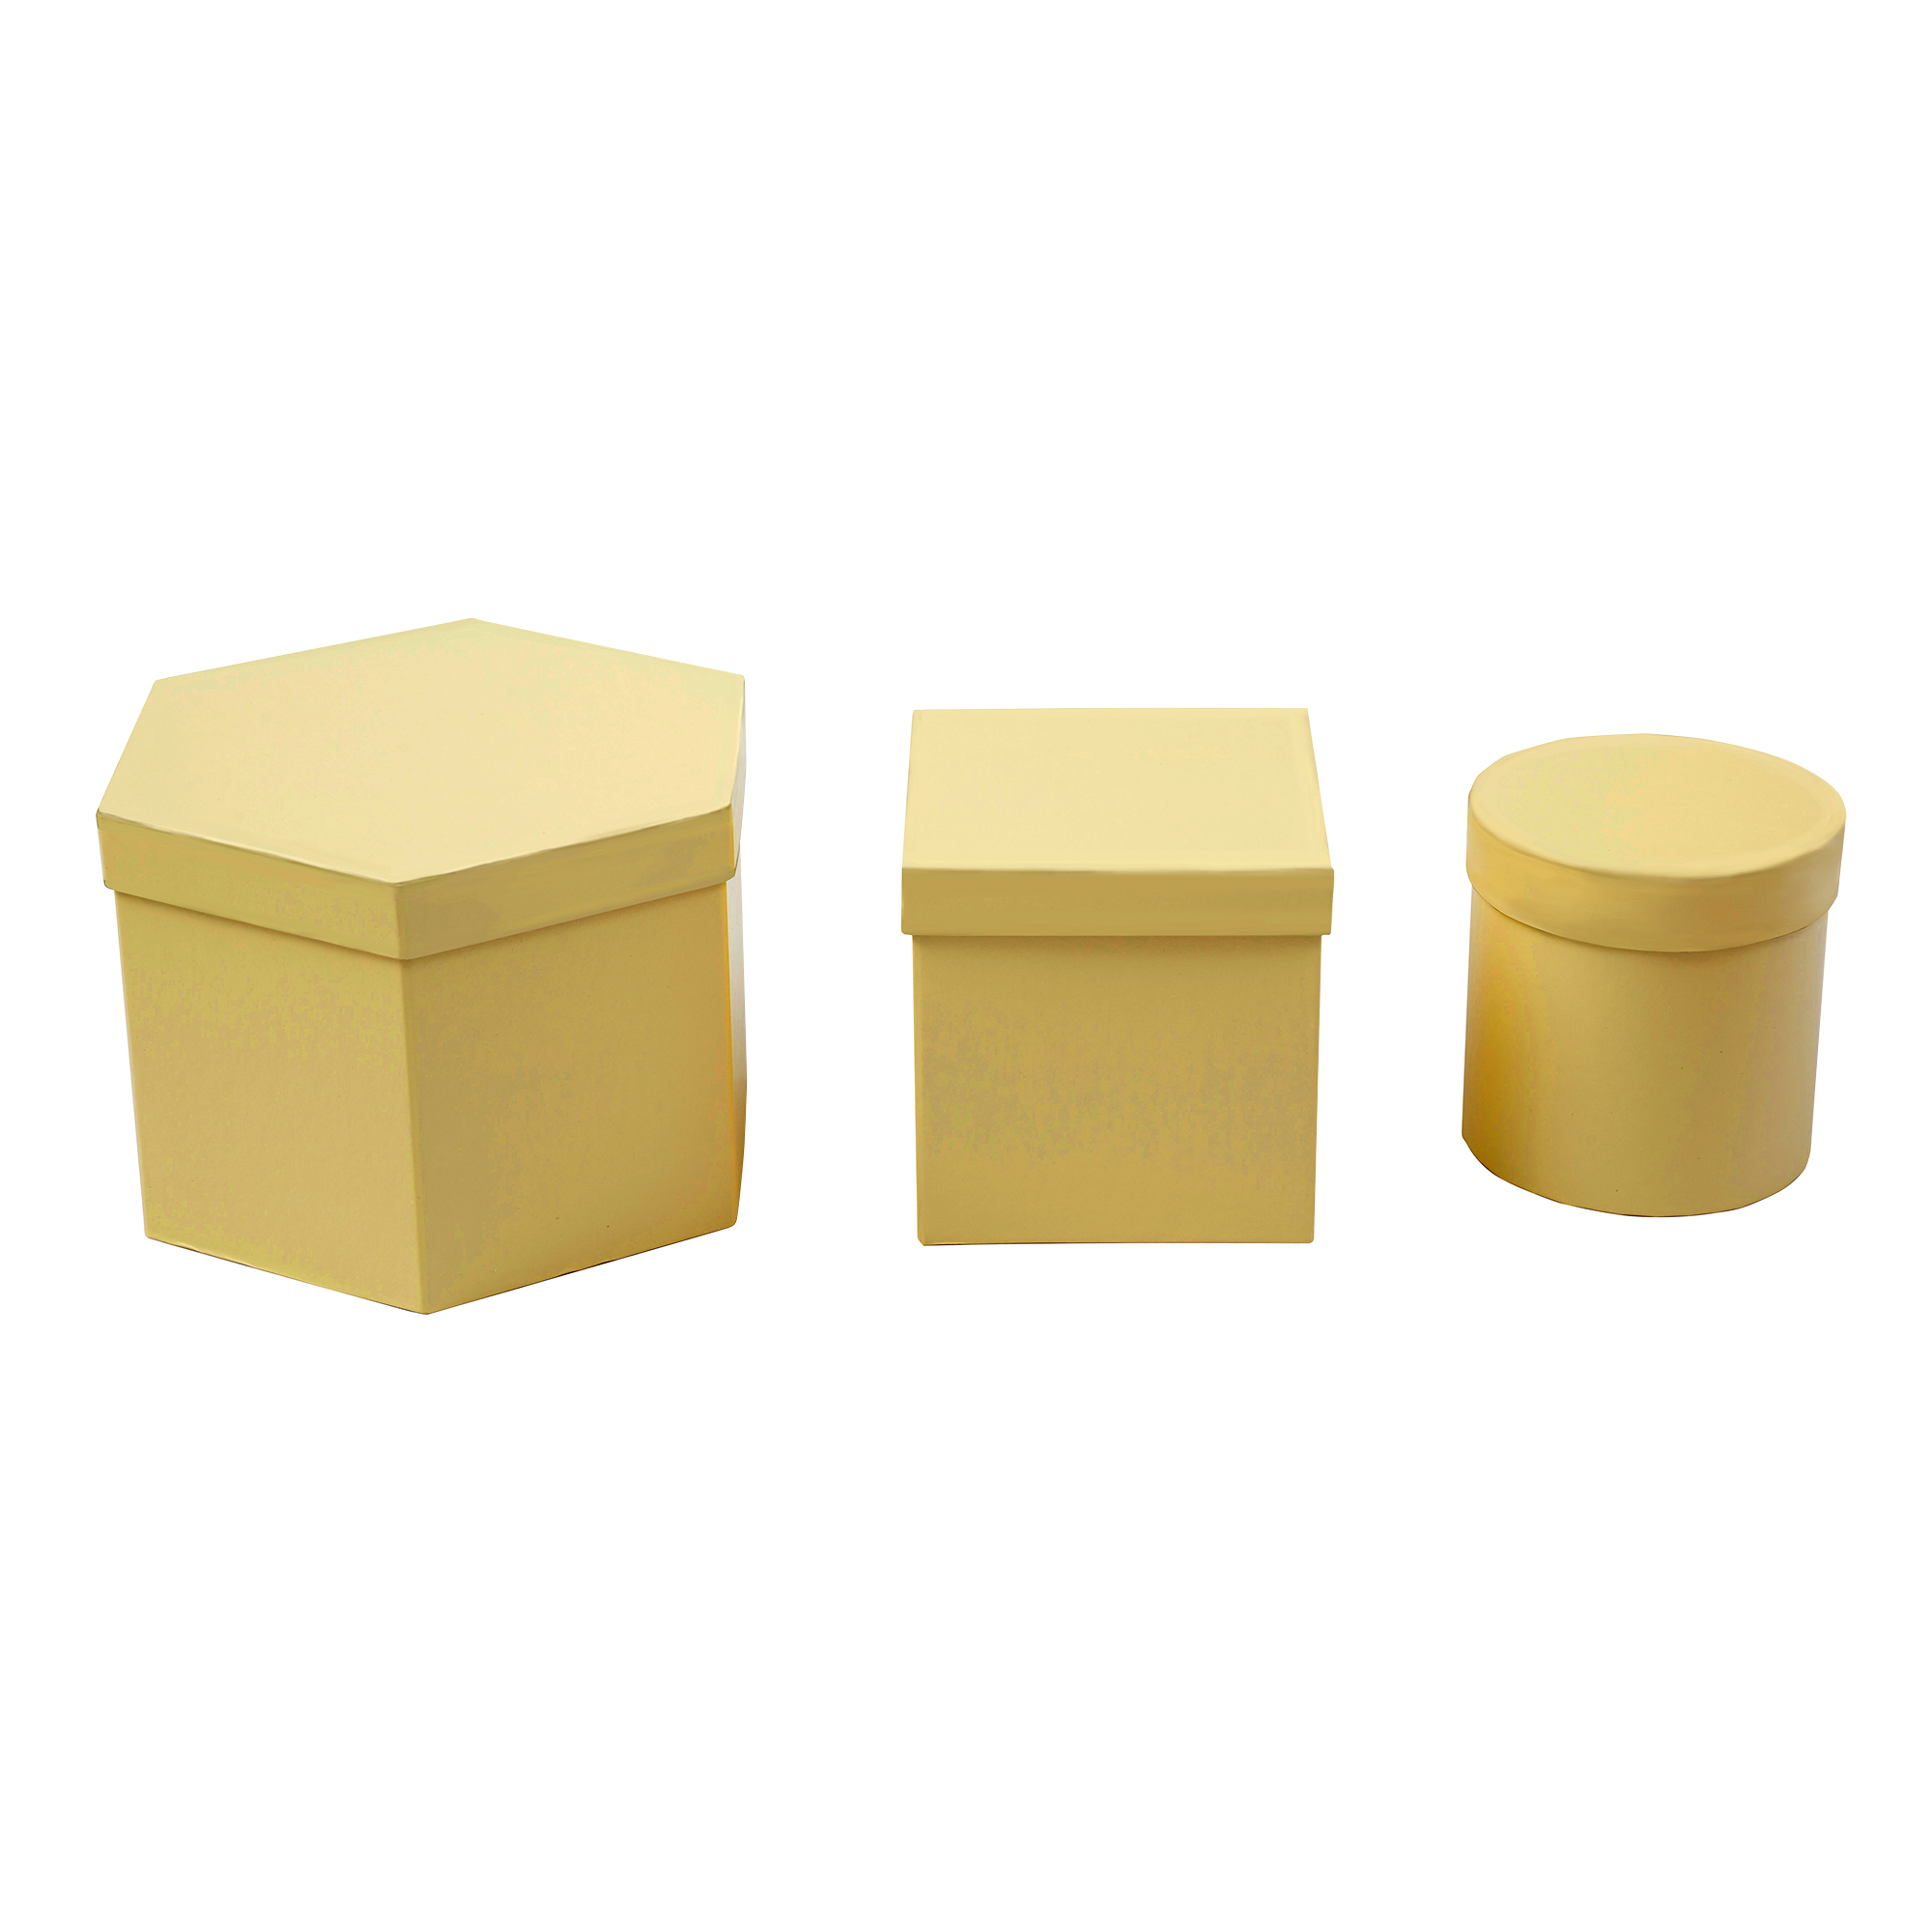 Nested Floral Boxes 3pc/set - All Gold